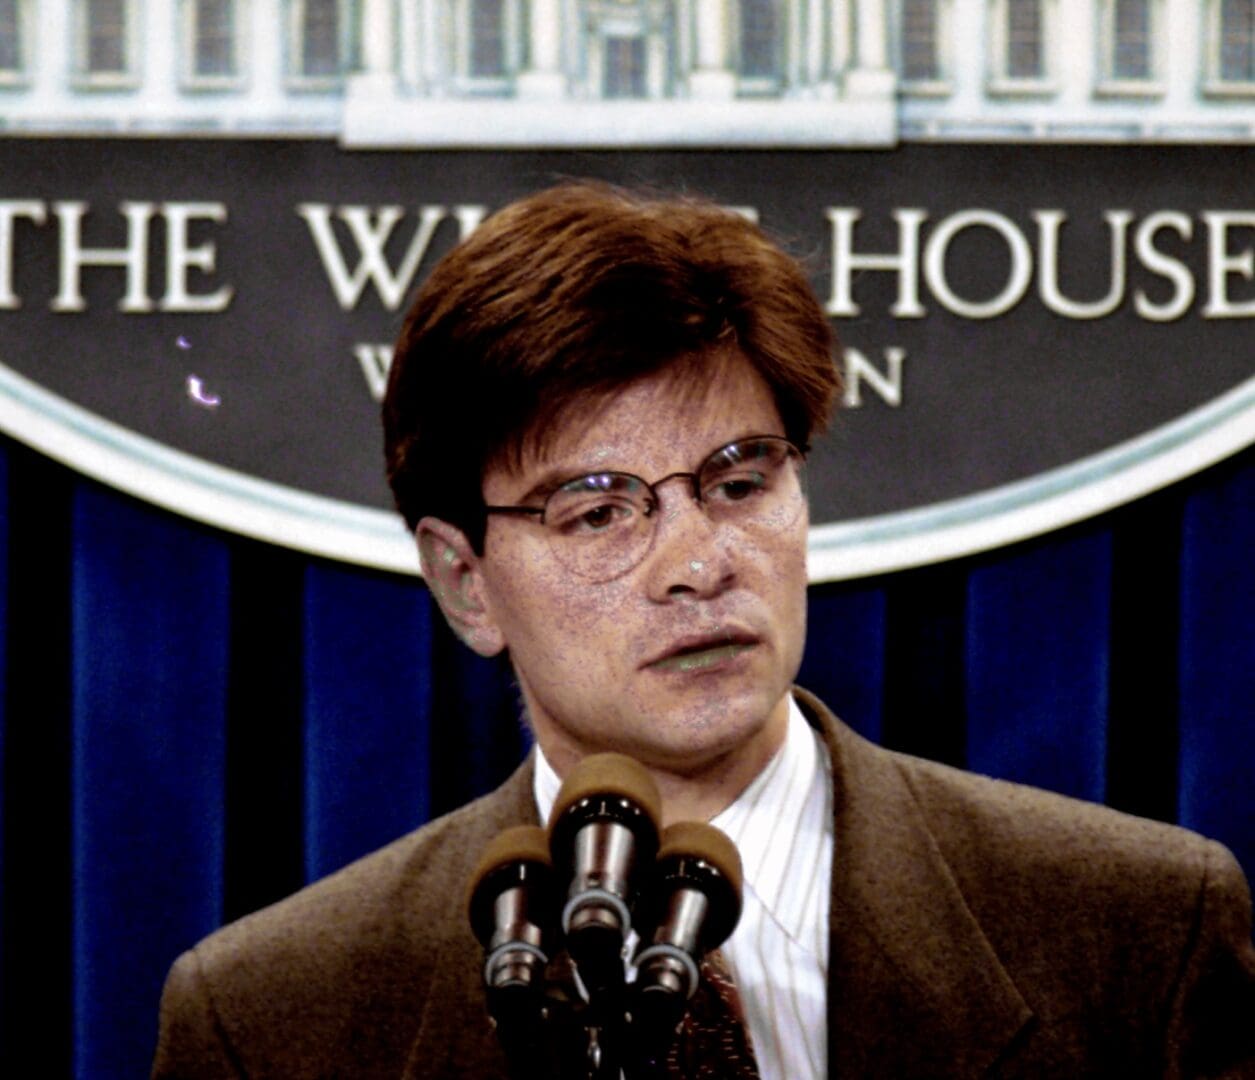 A person in glasses and a suit speaks into multiple microphones